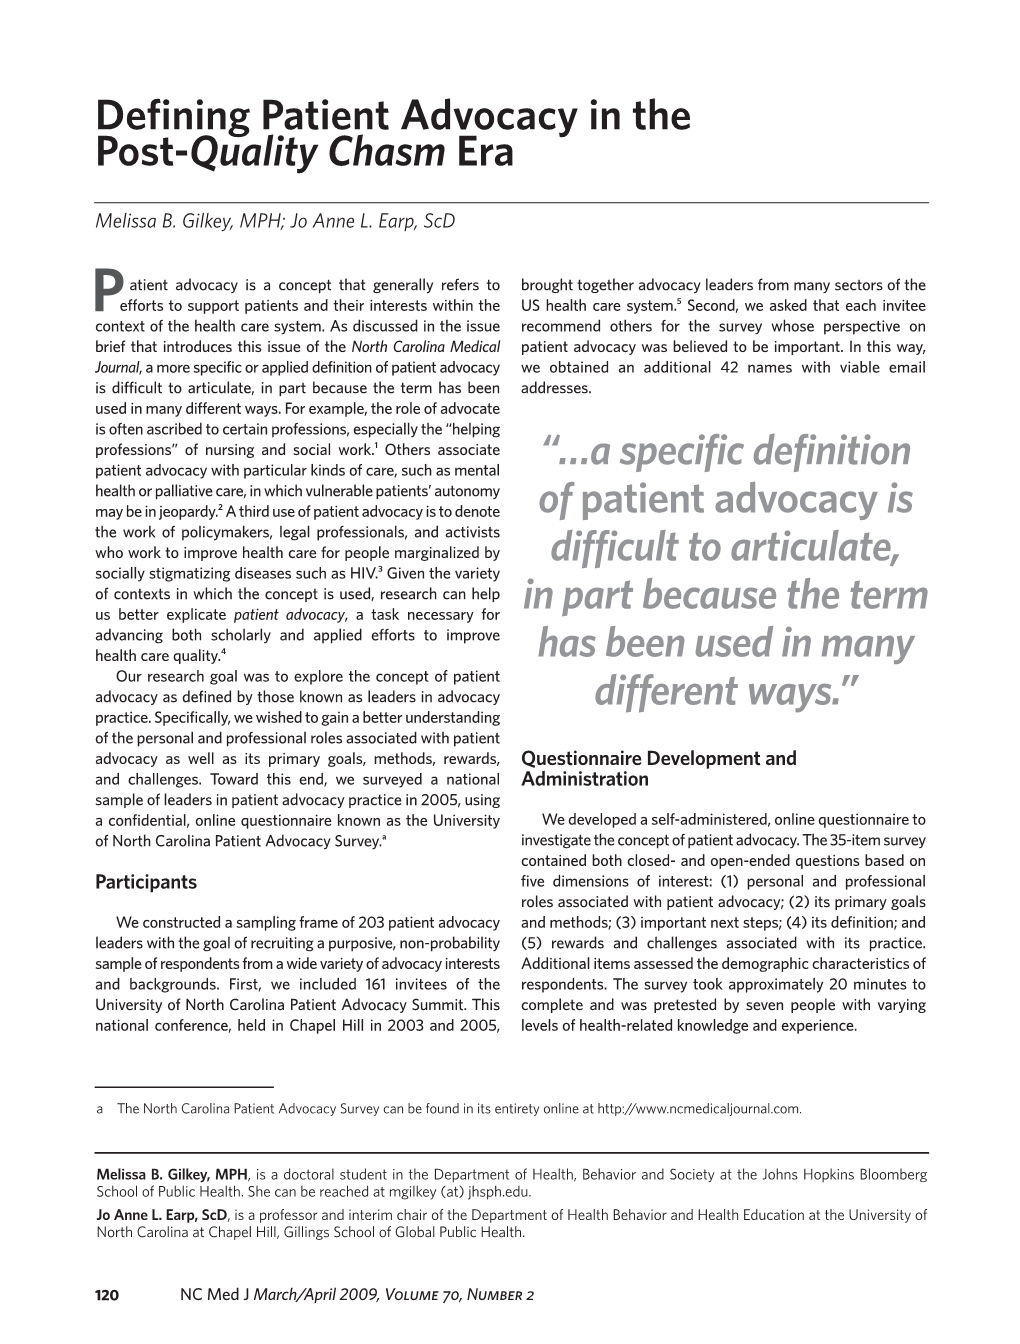 Defining Patient Advocacy in the Post- Quality Chasm Era